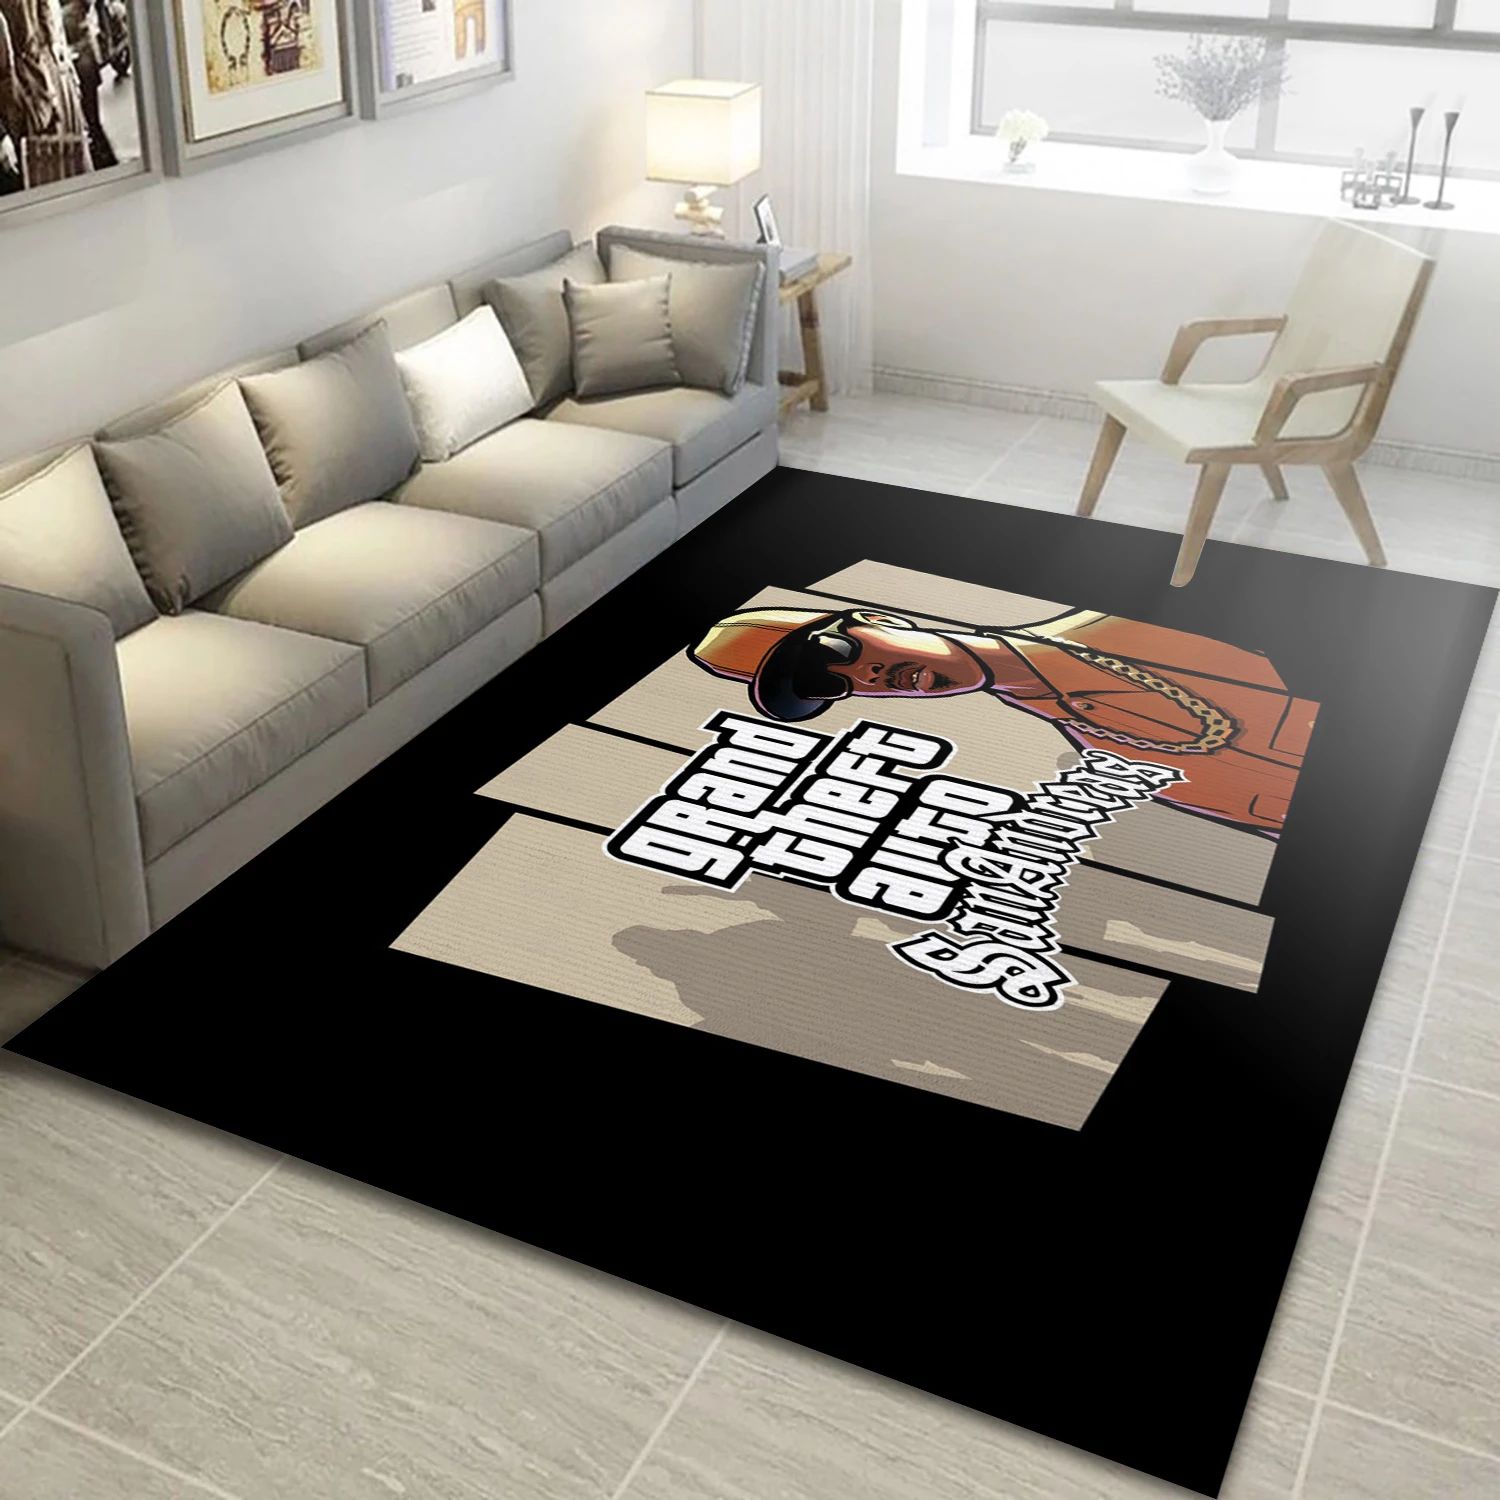 Grand Theft Auto San Andreas Video Game Reangle Rug, Bedroom Rug - Home Decor Floor Decor - Indoor Outdoor Rugs